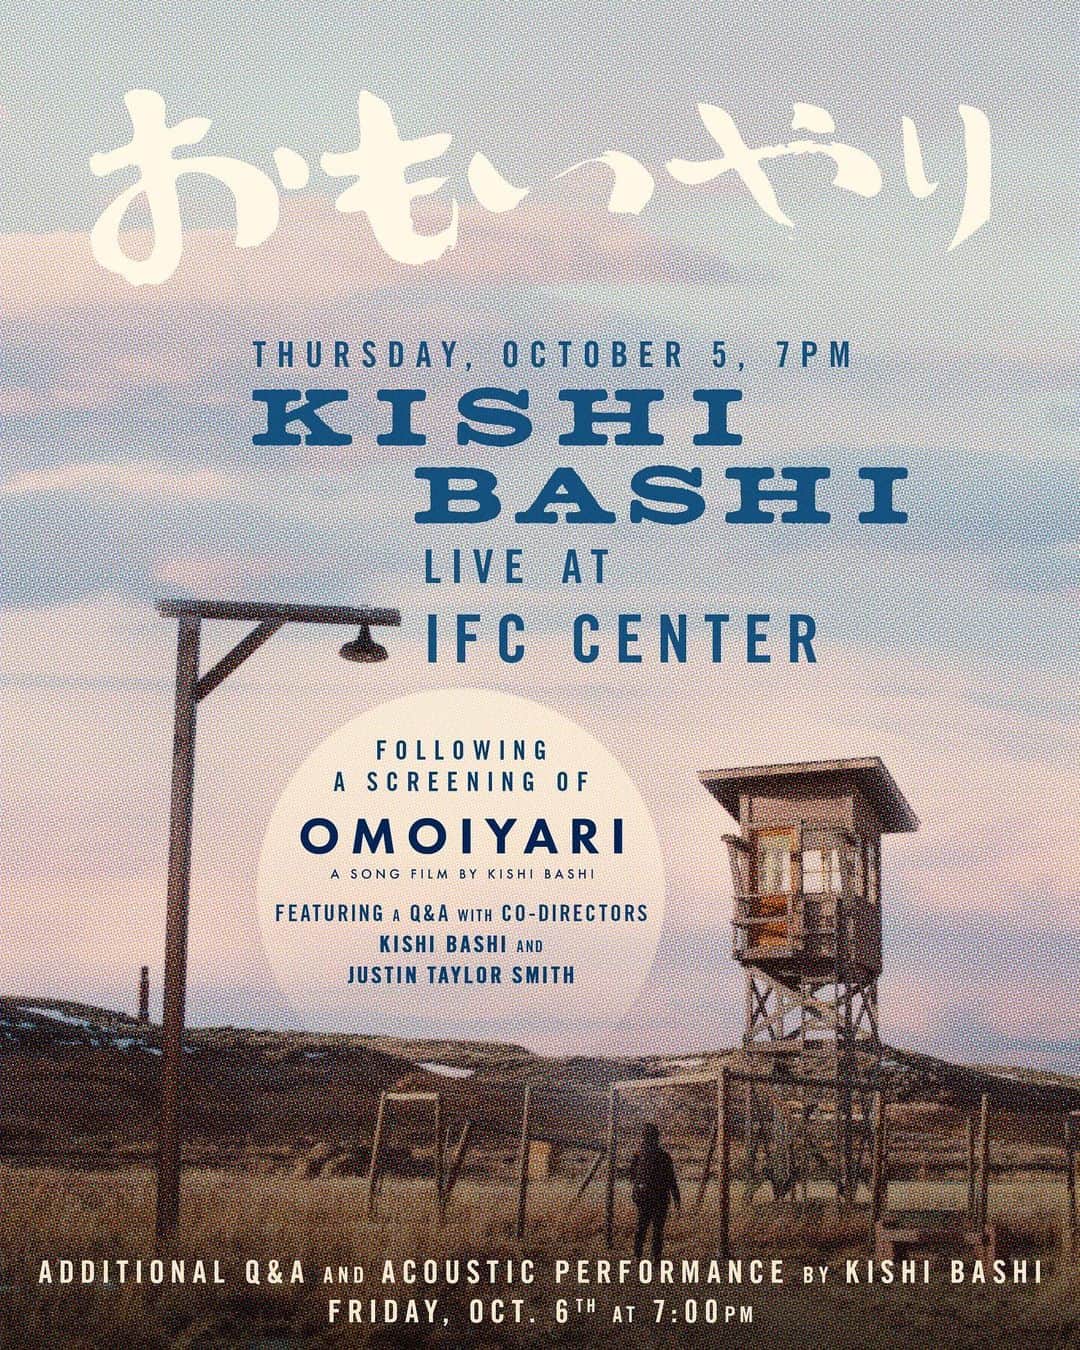 Kishi Bashiのインスタグラム：「NYC: Join us at @IFCCenter for a sneak preview screening of #Omoiyari with @kishi_bashi in-person for a special LIVE PERFORMANCE and a Q&A with co-director @jtaylorsmith: www.ifccenter.com/films/a-song-film-by-kishi-bashi-omoiyari/」